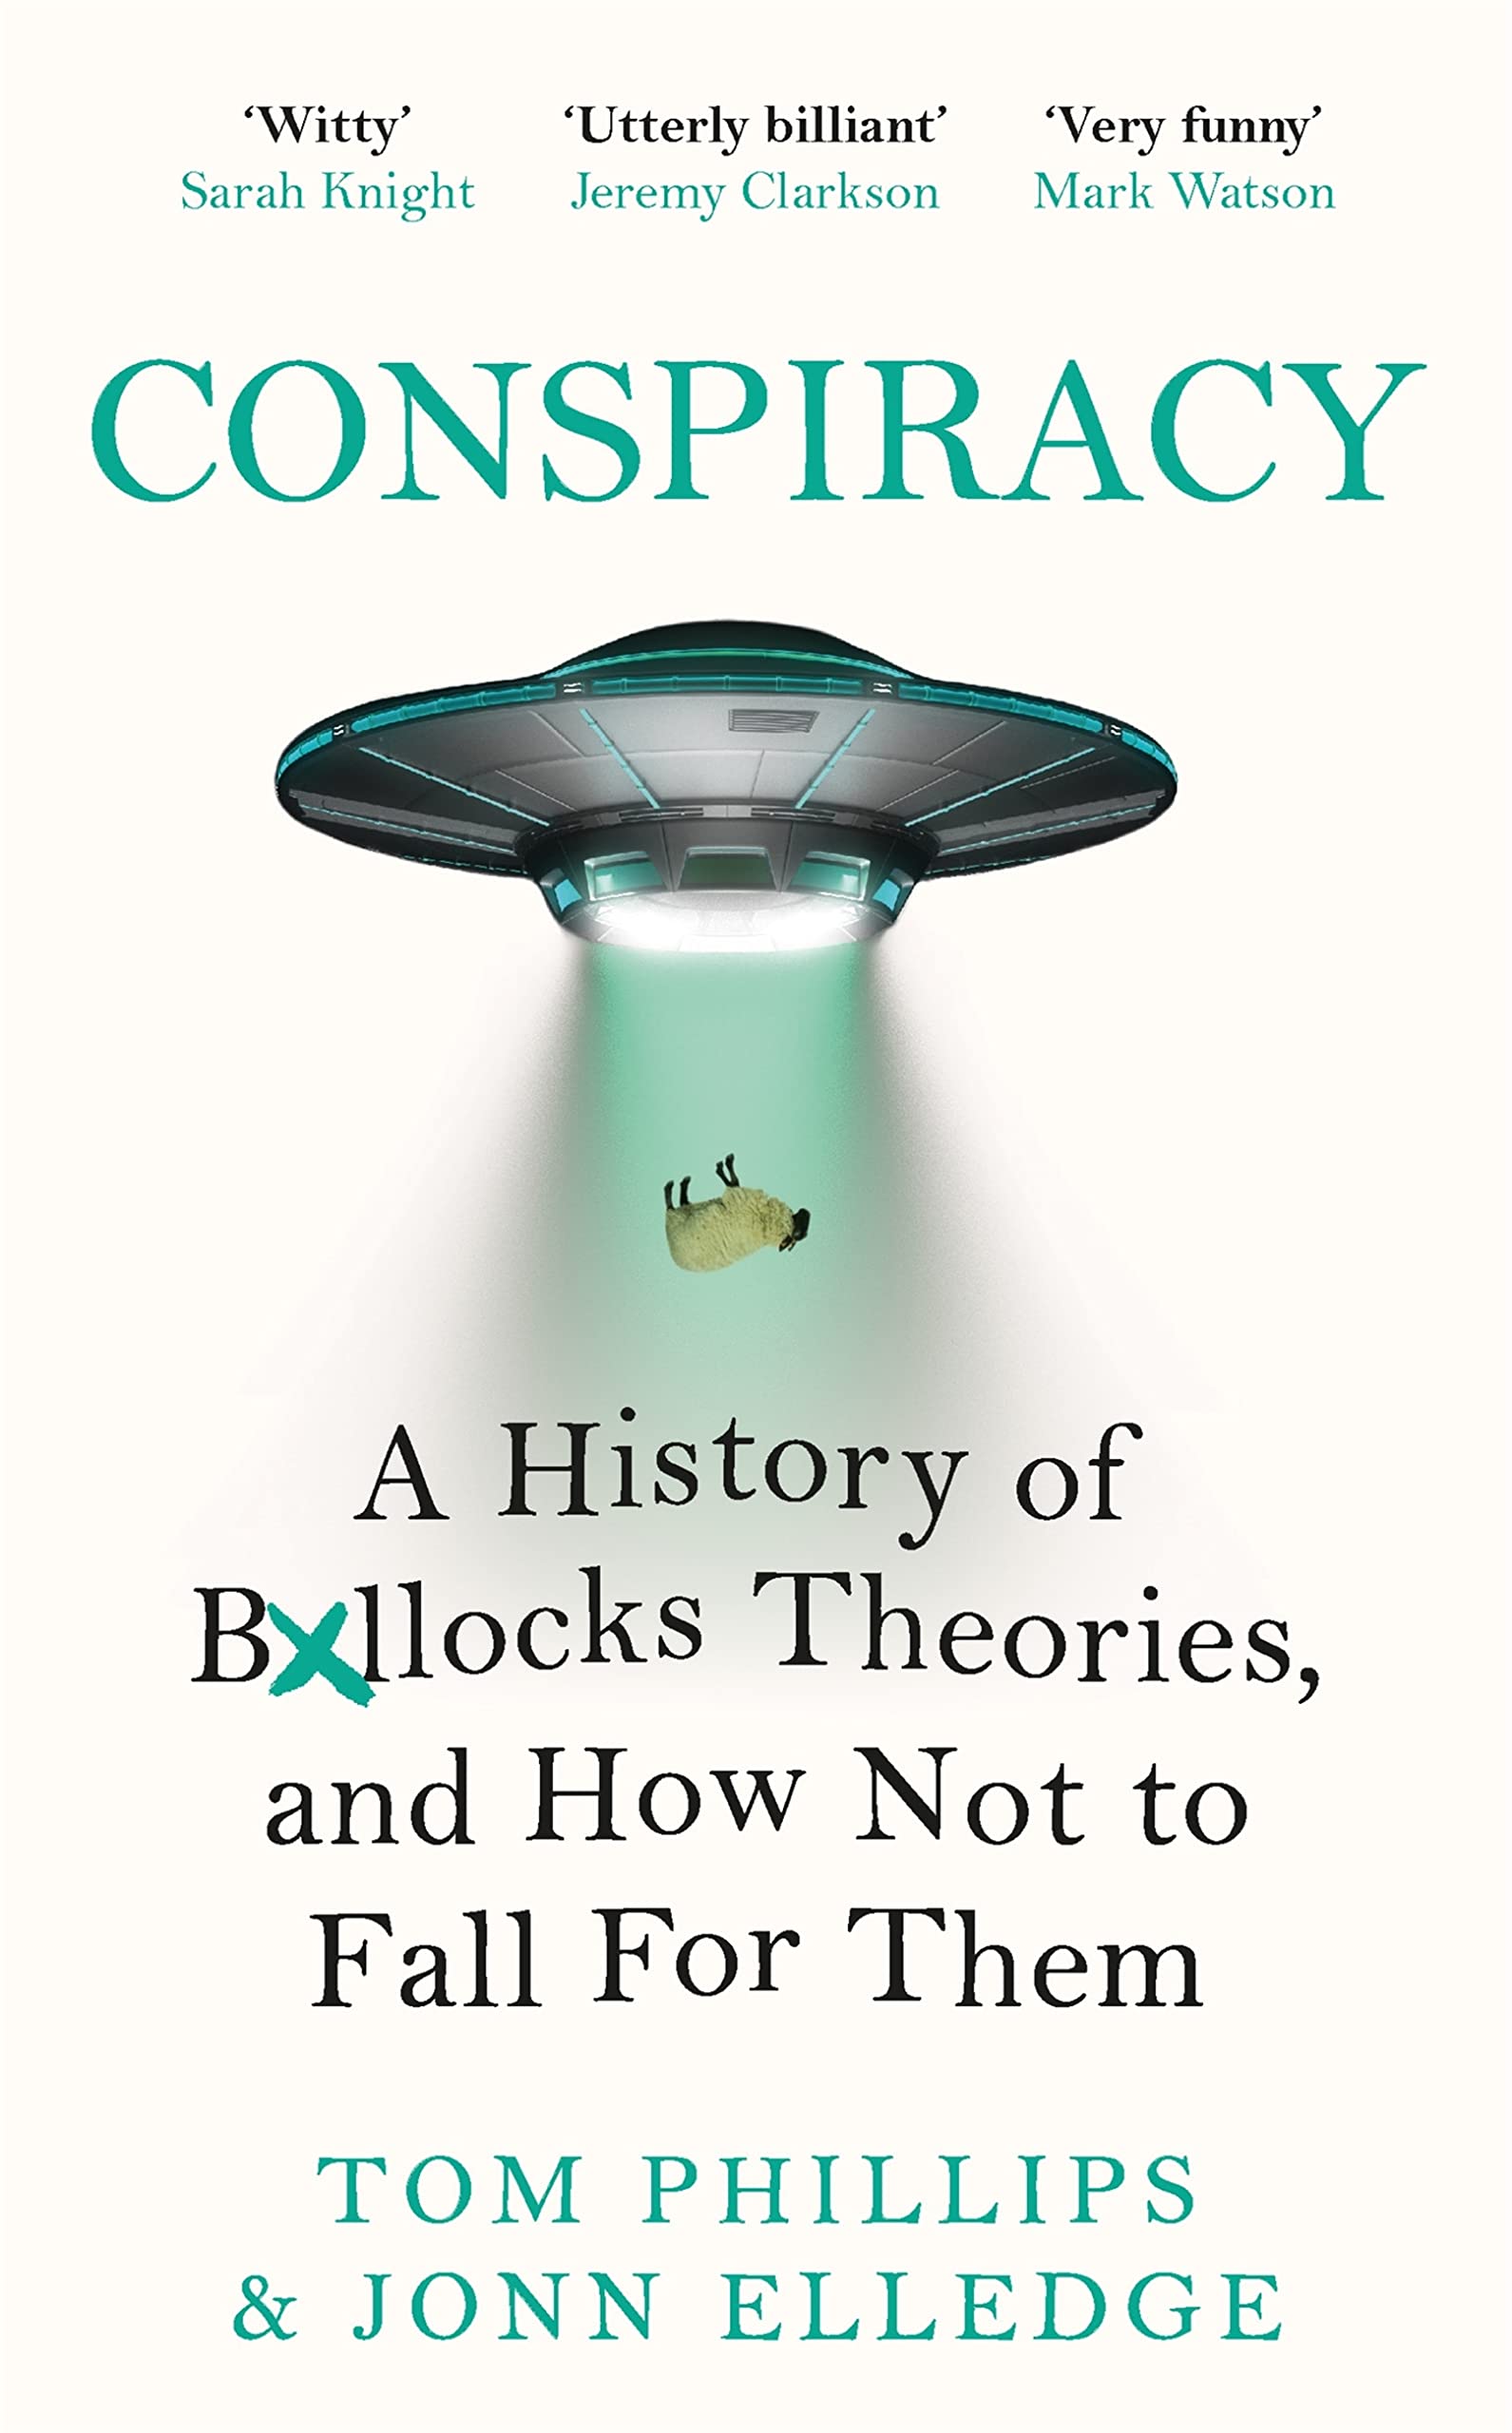 Jonn Elledge, Tom Phillips: Conspiracy: A History of Boll*cks Theories, and How Not to Fall for Them